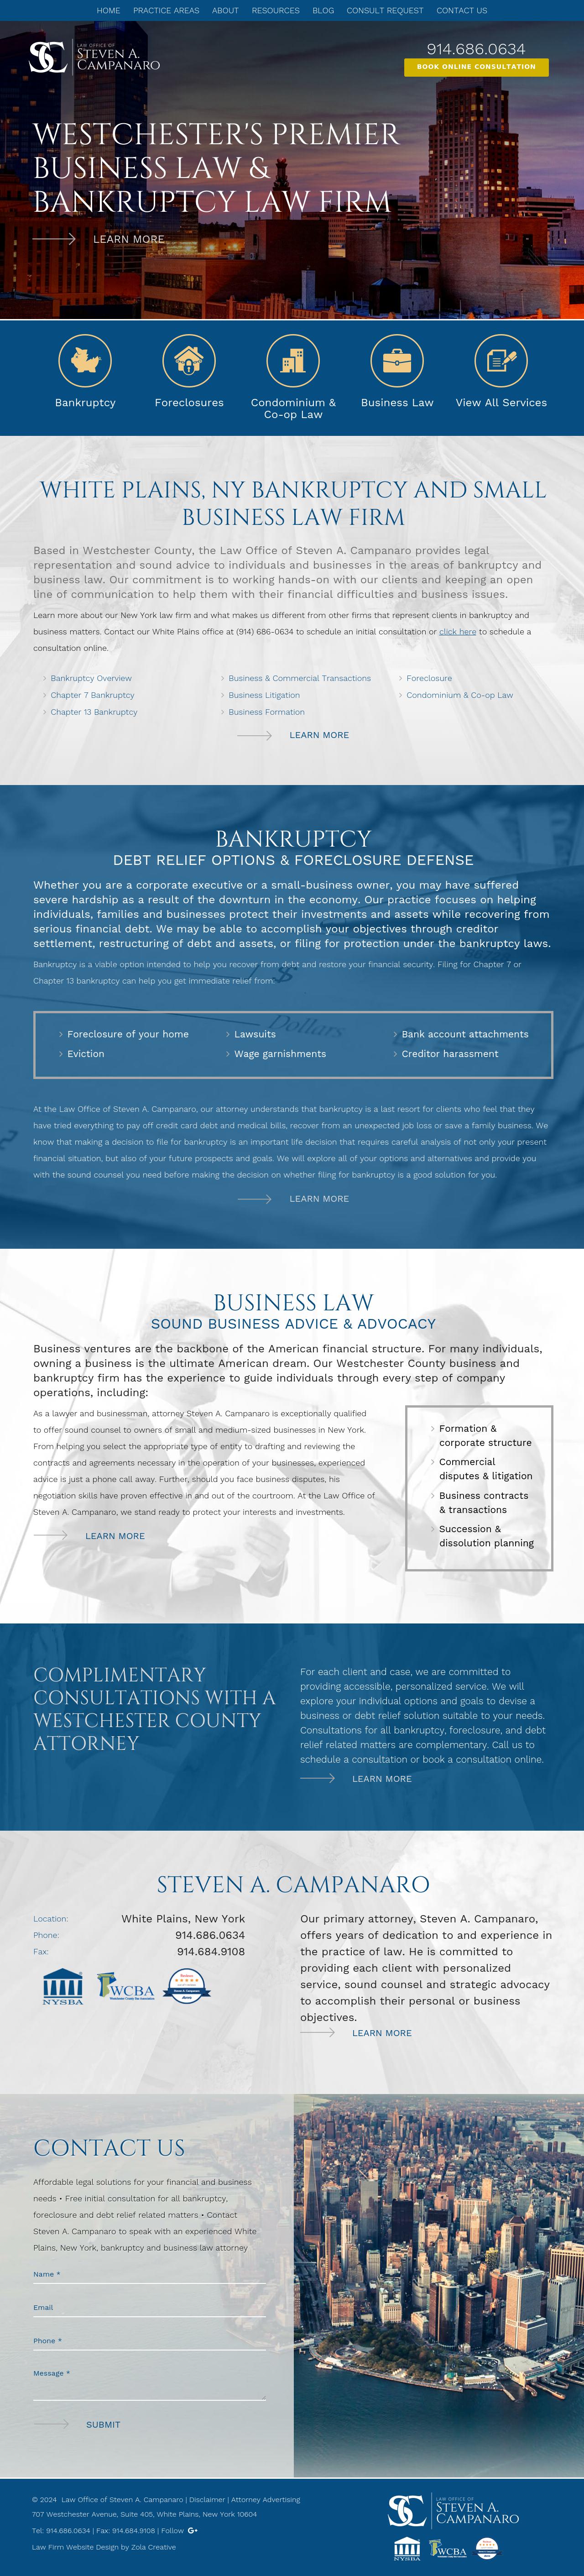 Law Office of Steven A. Campanaro - White Plains NY Lawyers